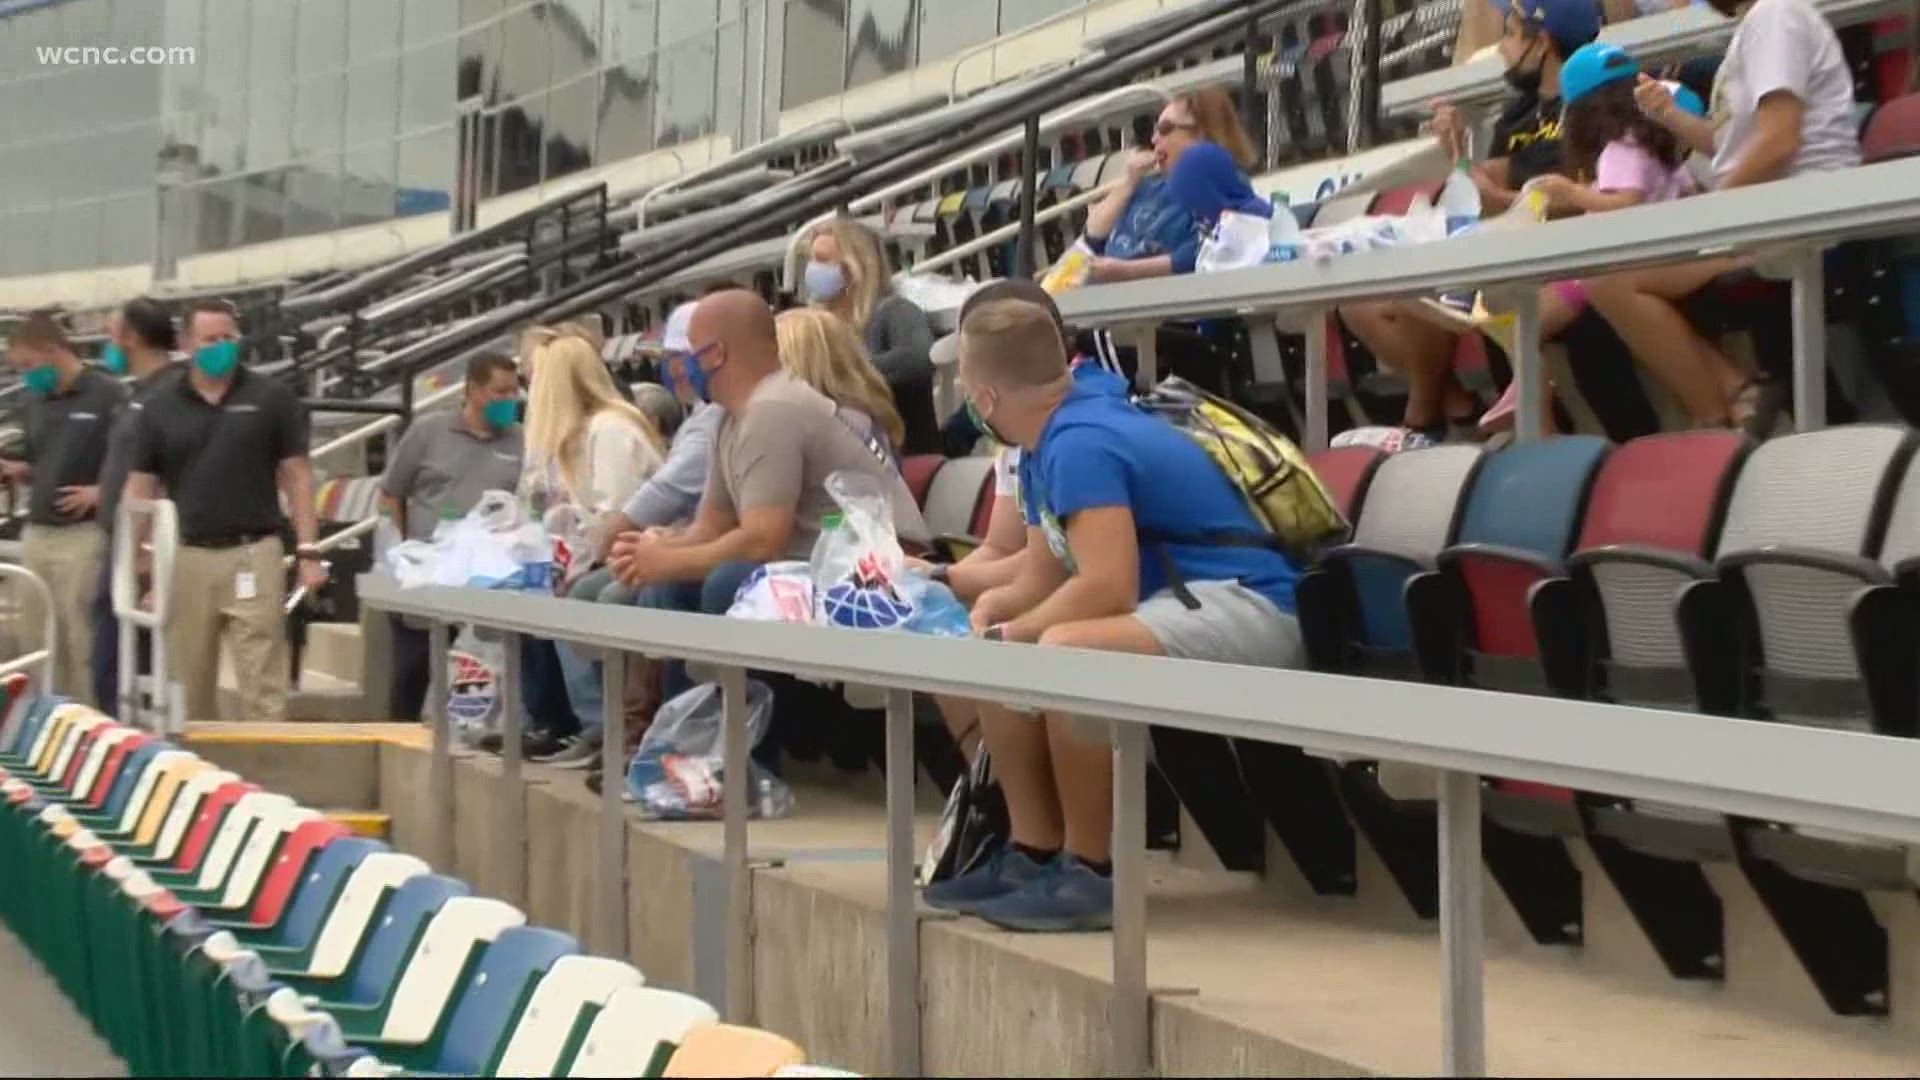 A select group of fans on Friday got to walk through the protocols for attending this weekend's races including hand sanitizer, face coverings, health checks.